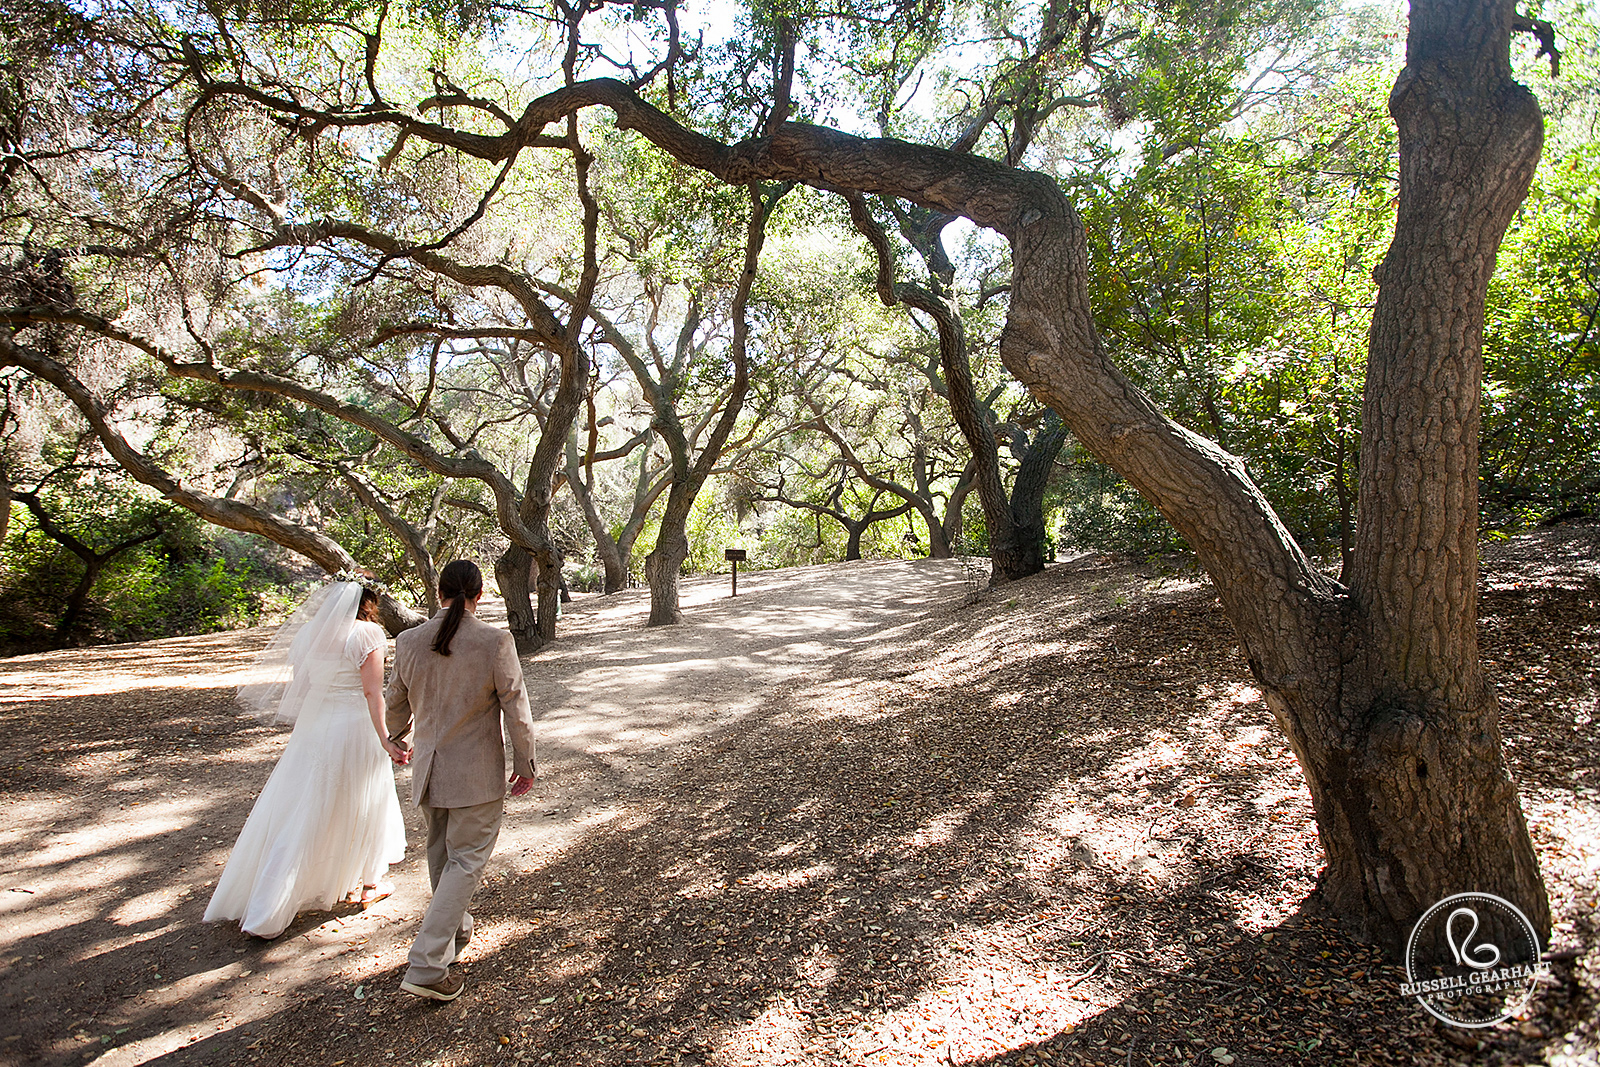 Couple Headed to Ceremony – Southern California Wedding  – Russell Gearhart Photography – www.gearhartphoto.com  